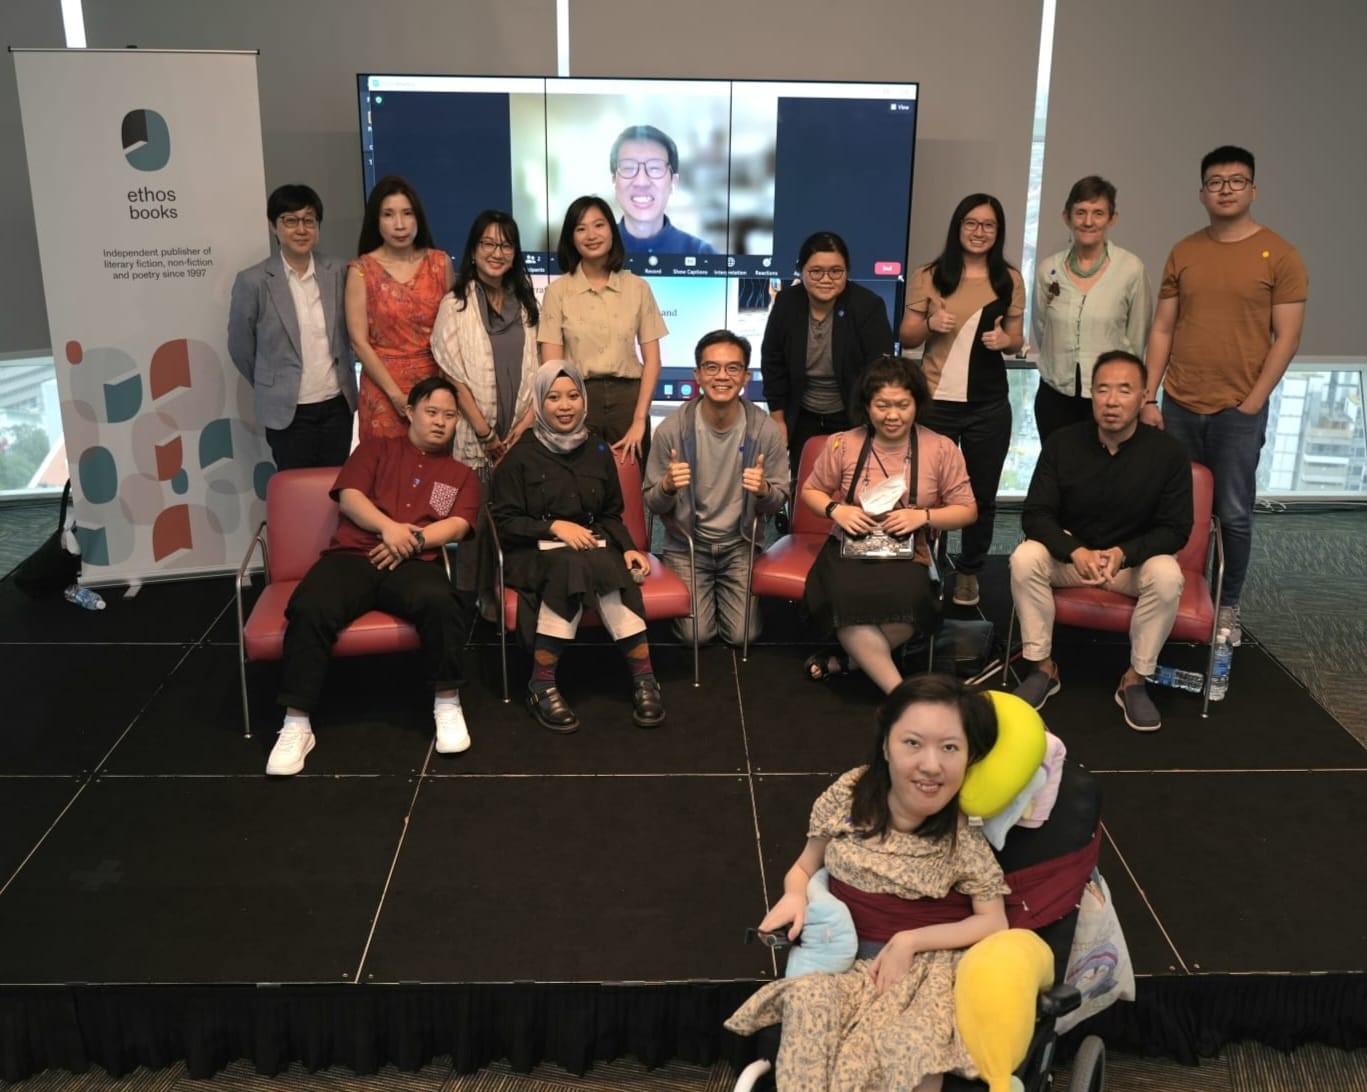 Siew Ling taking a group photo with the editors and other contributors to the book at the launch event. Her friend, Victor, who dialled in for the event, poses from his Zoom screen. 